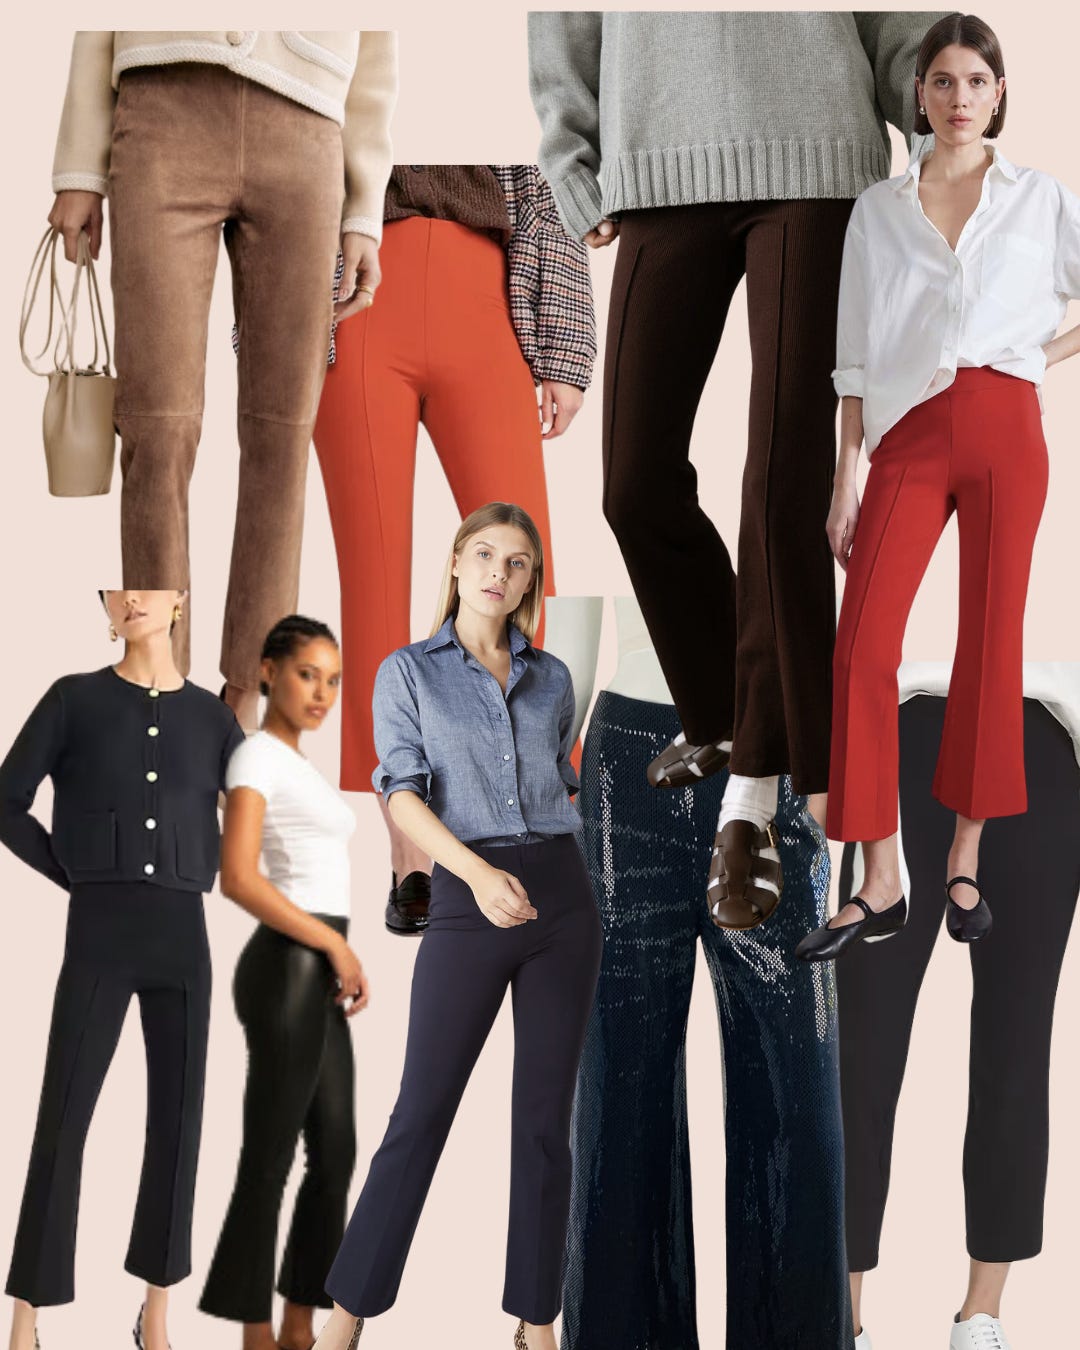 Sarah's Retail Diary: Kick Flare Pant Trends and Insights